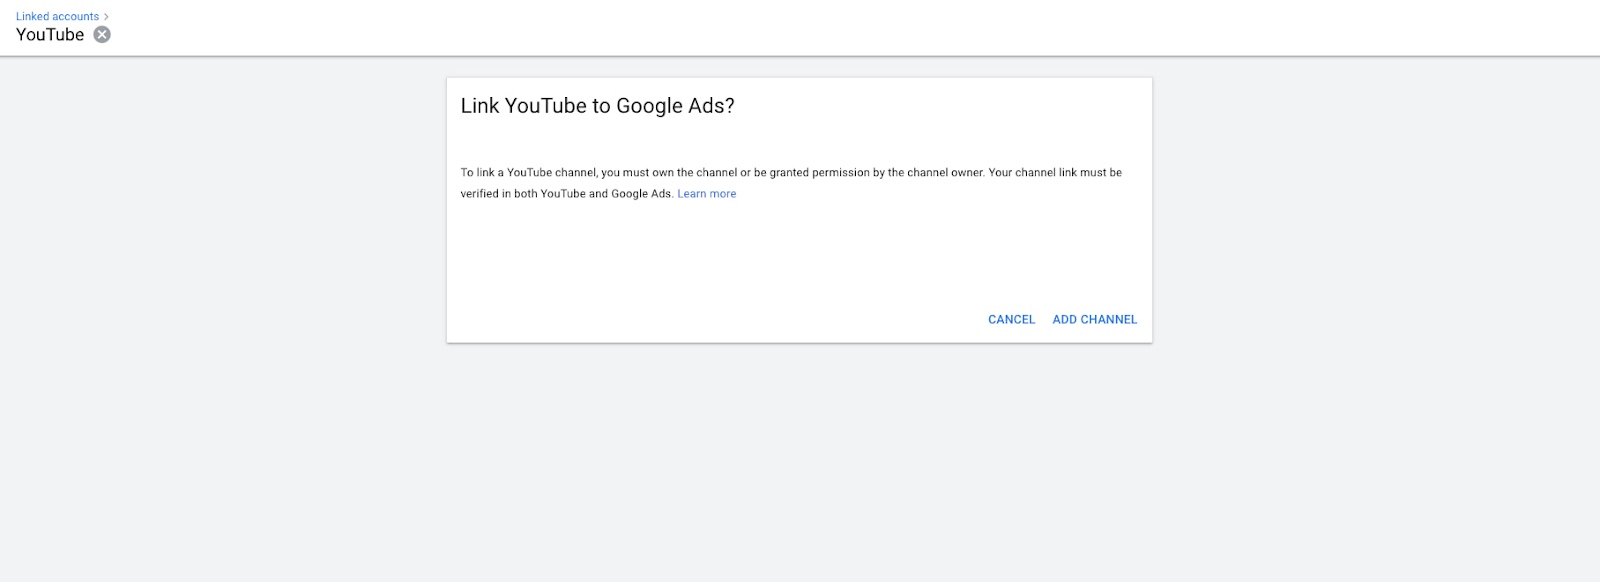 Linking of Google Ads account to YouTube channel finished